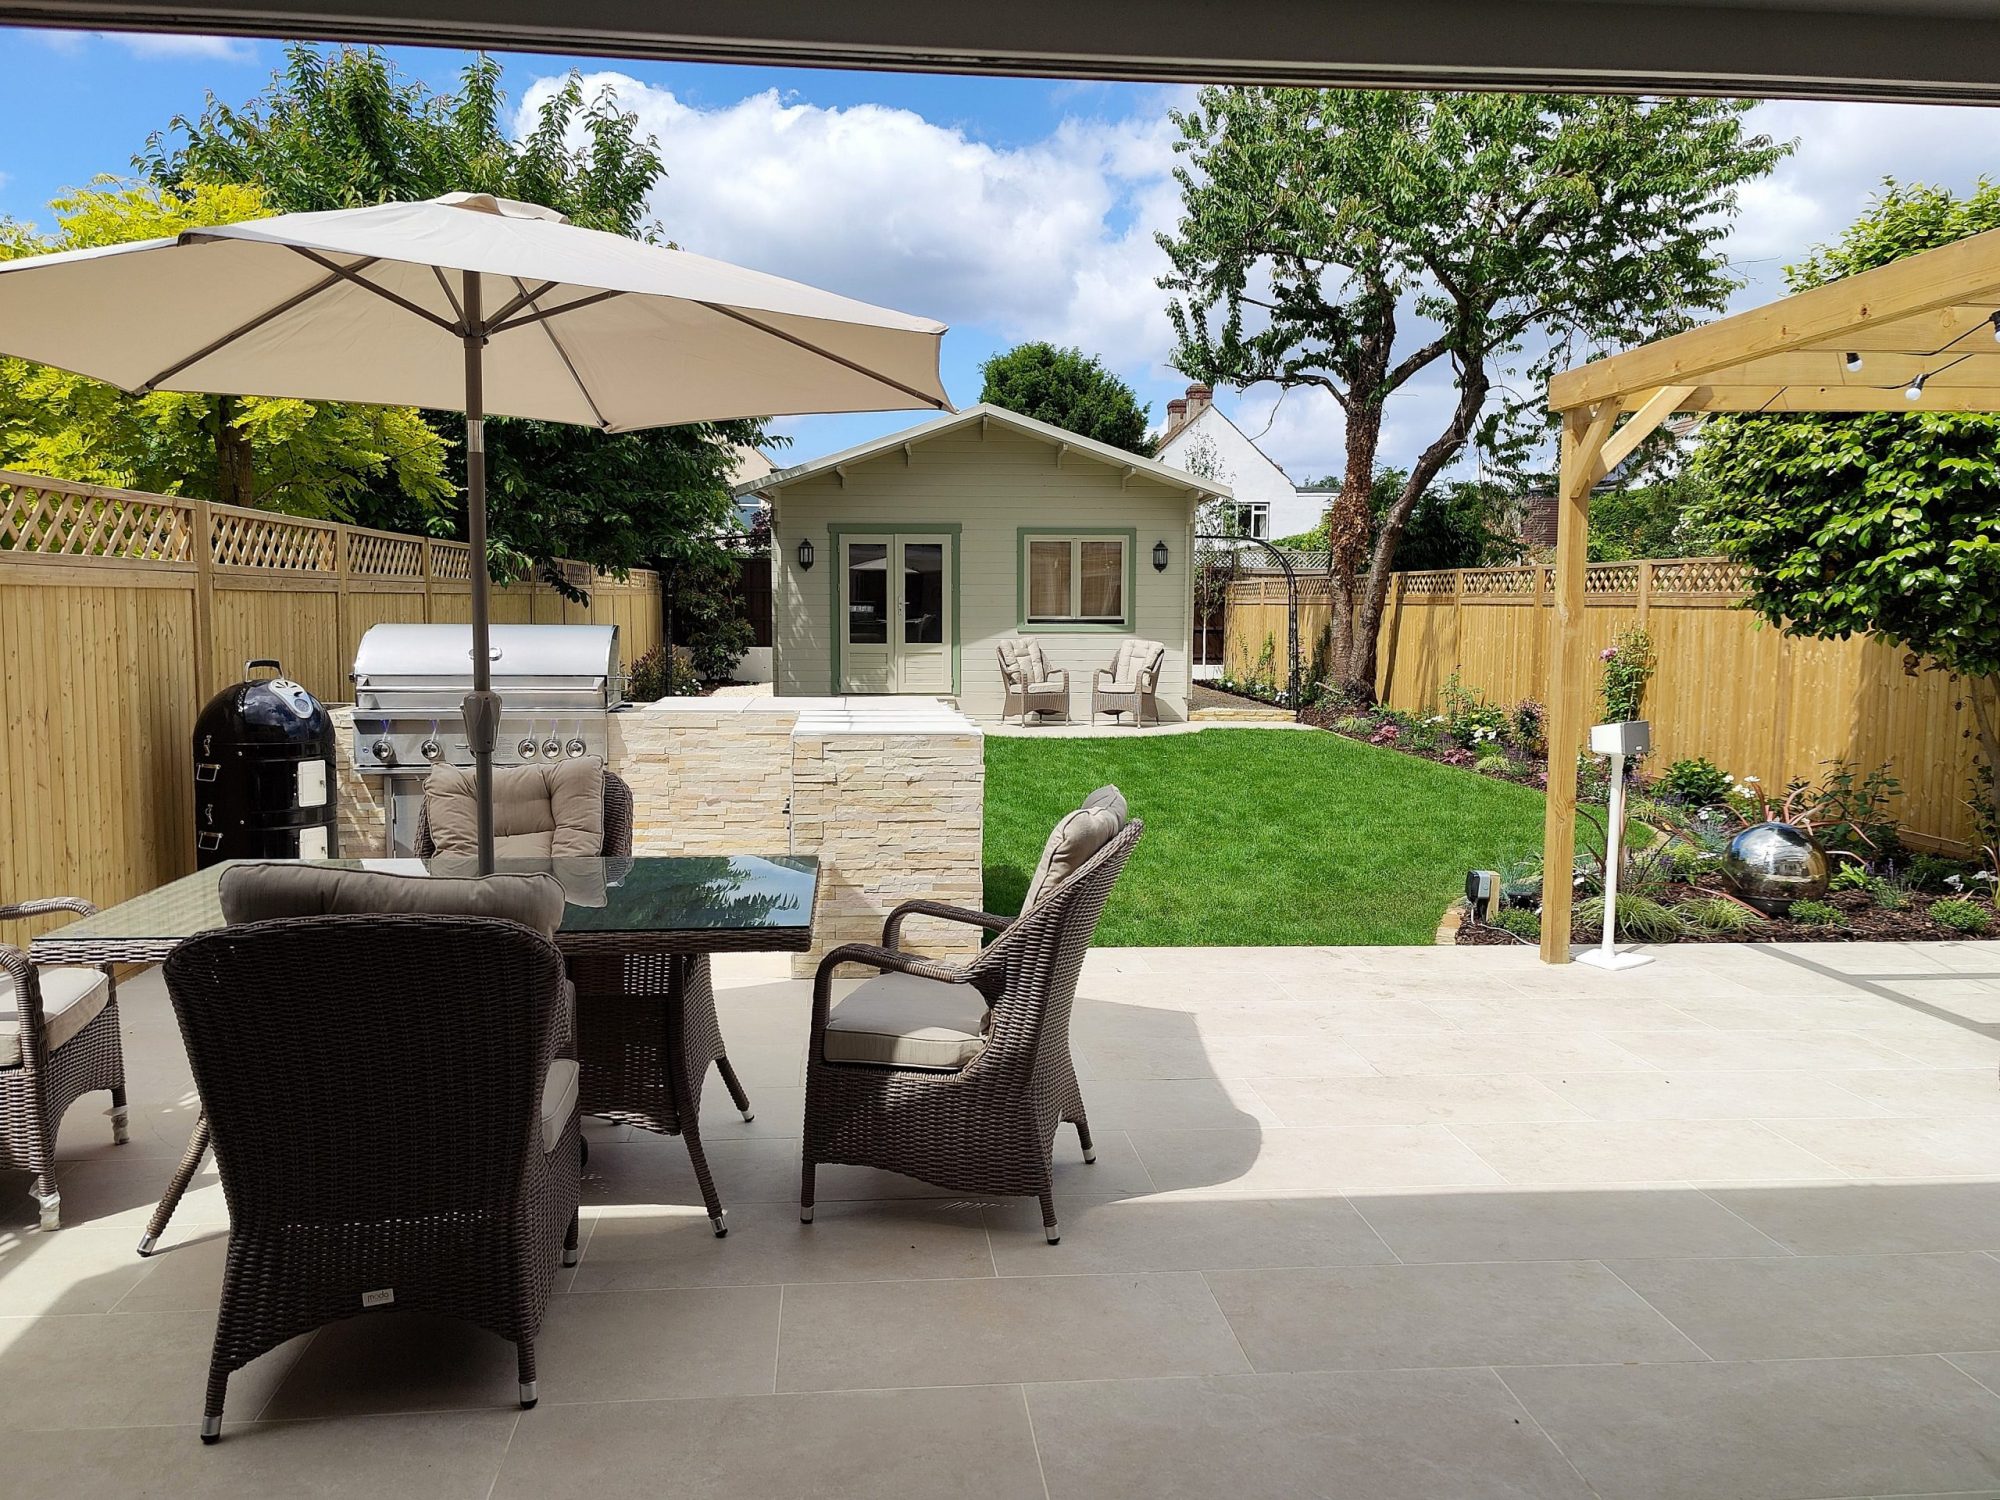 Family garden in bromley with outdoor kitchen, garden room and pergola